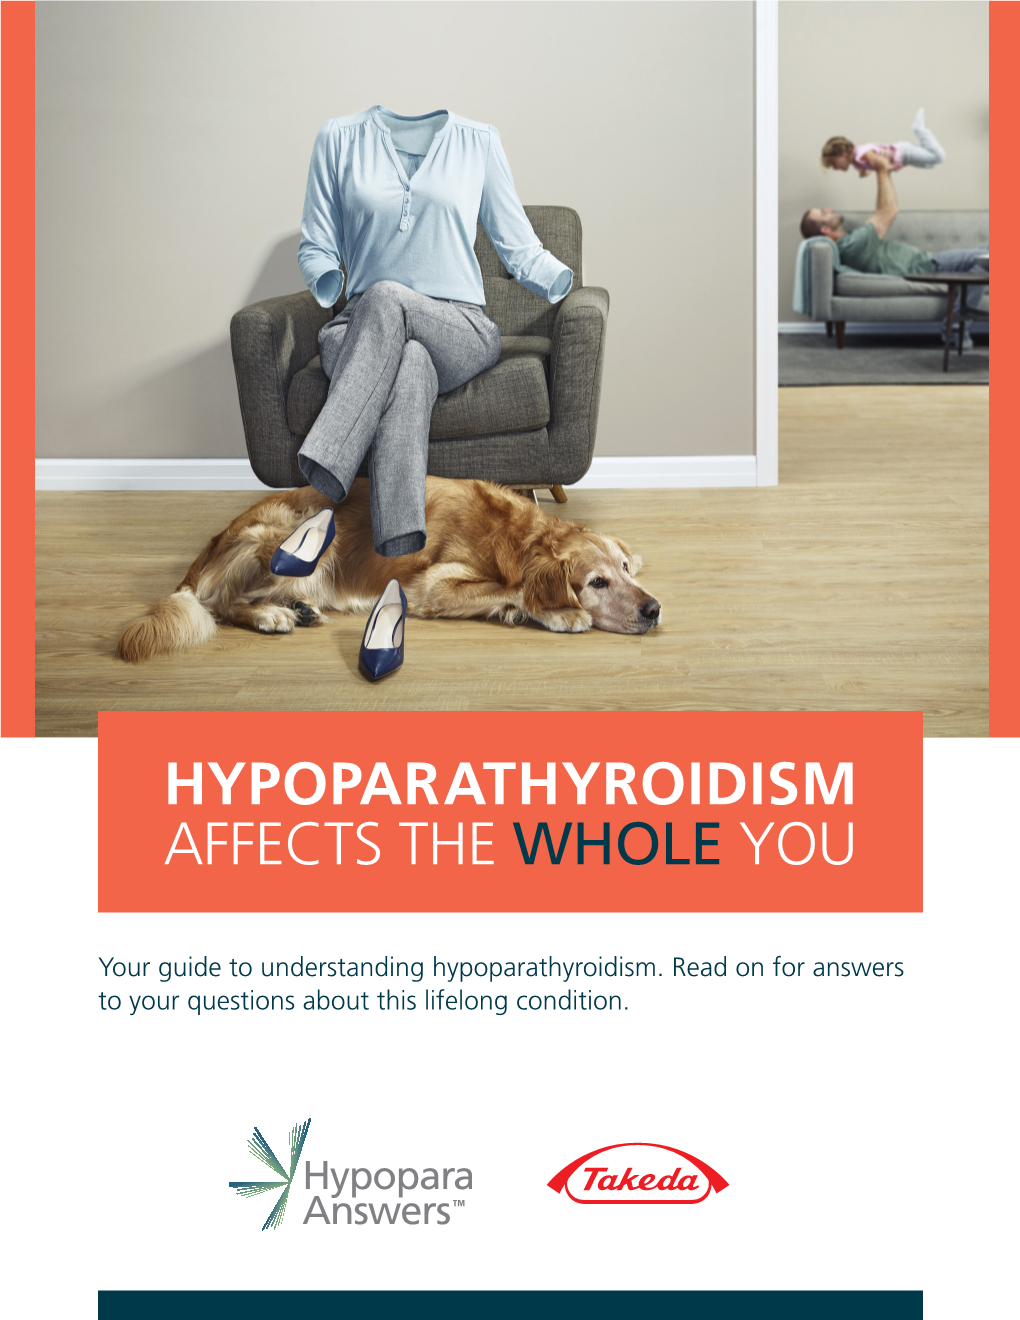 Hypoparathyroidism Affects the Whole You